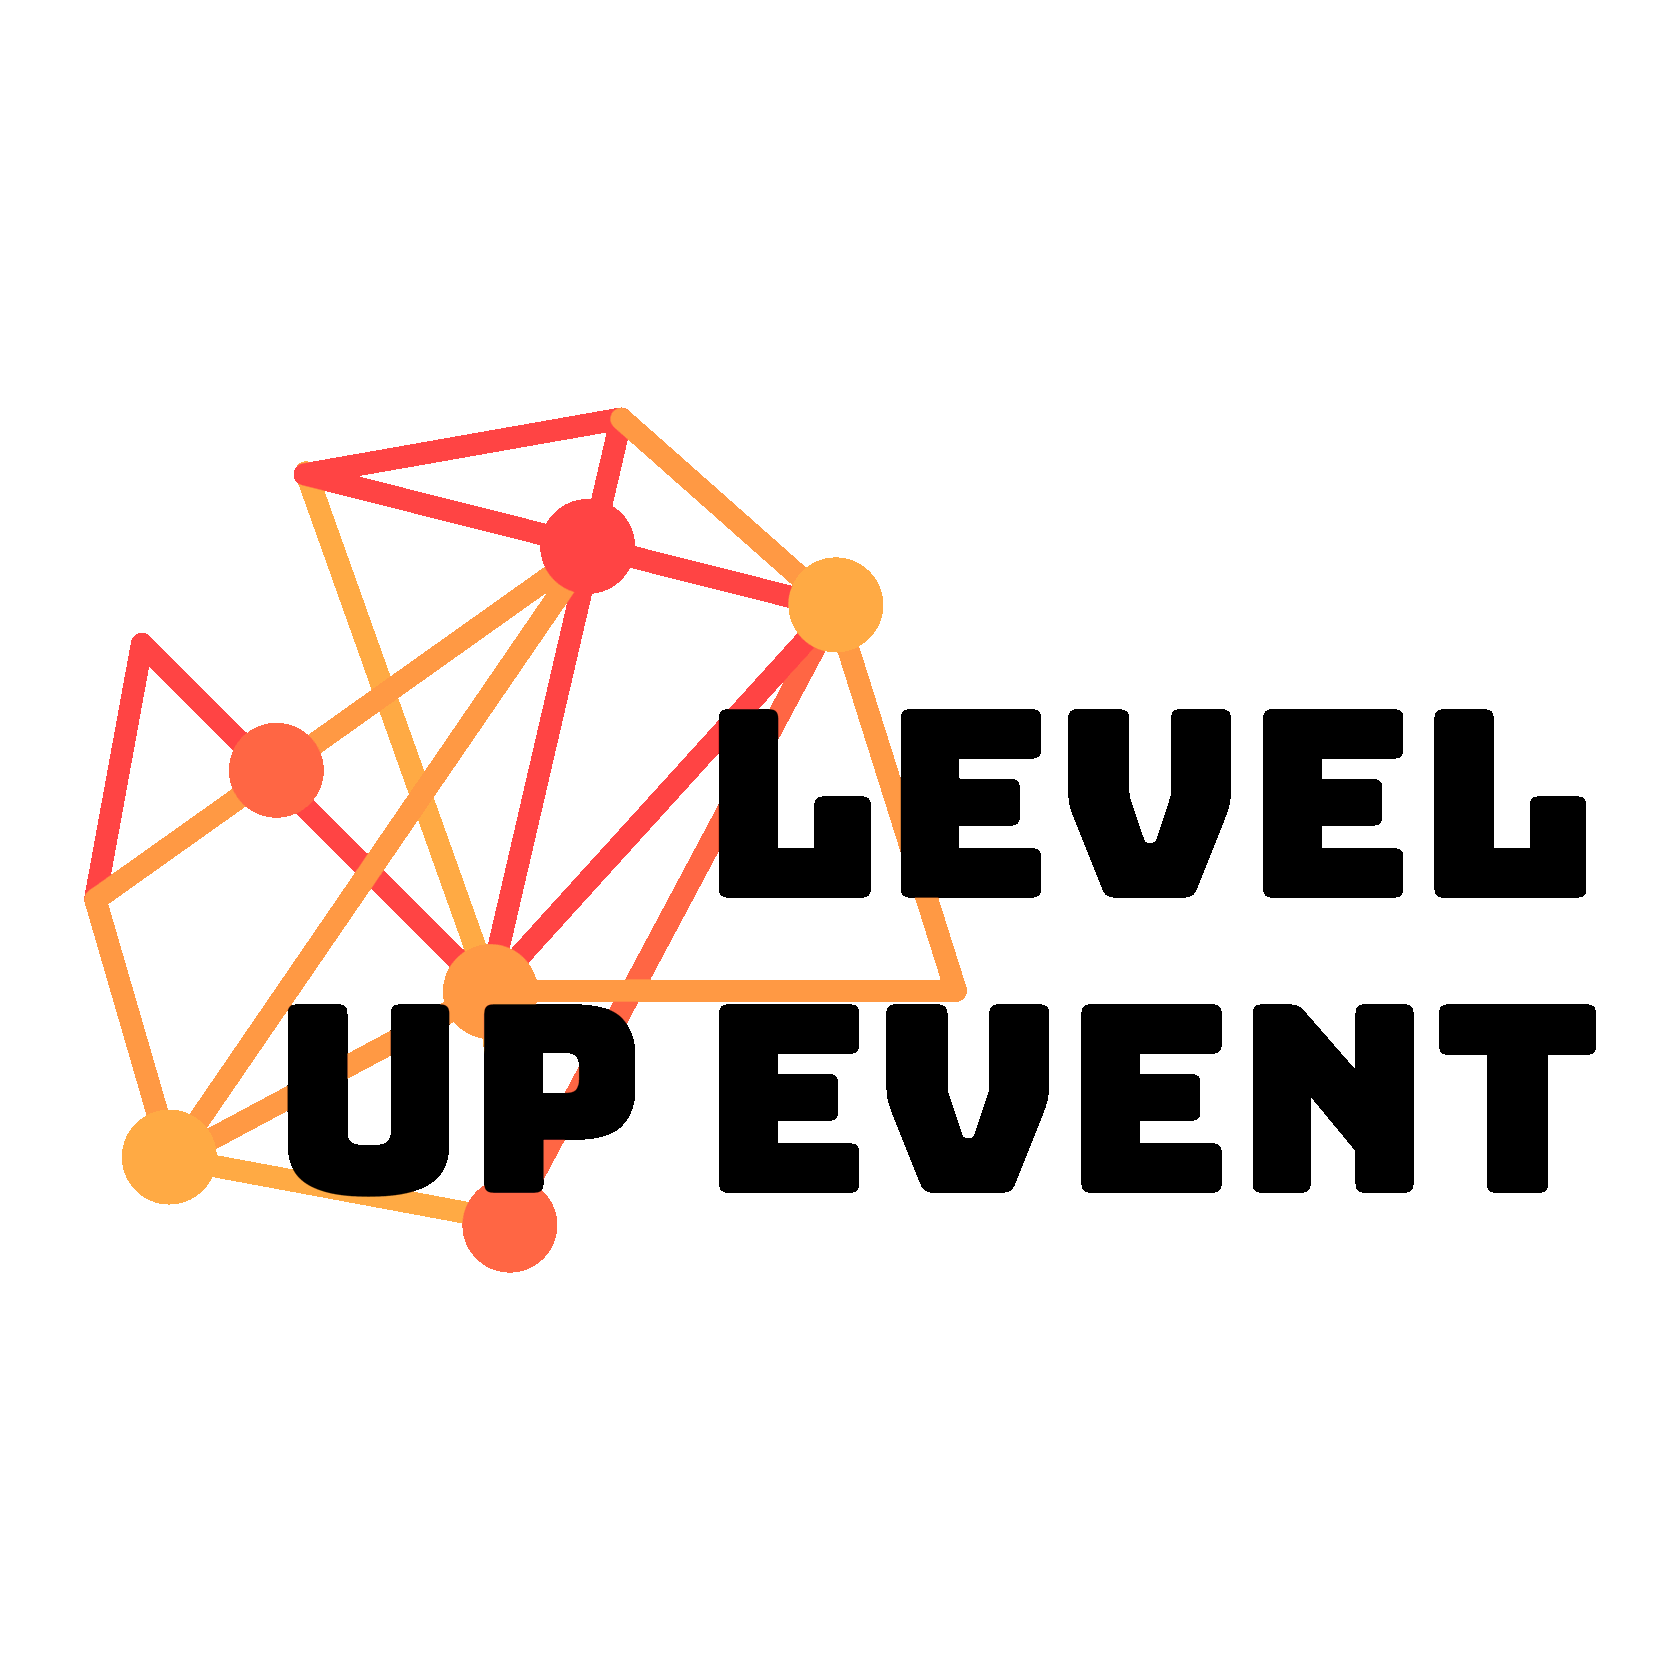 Level Up Event